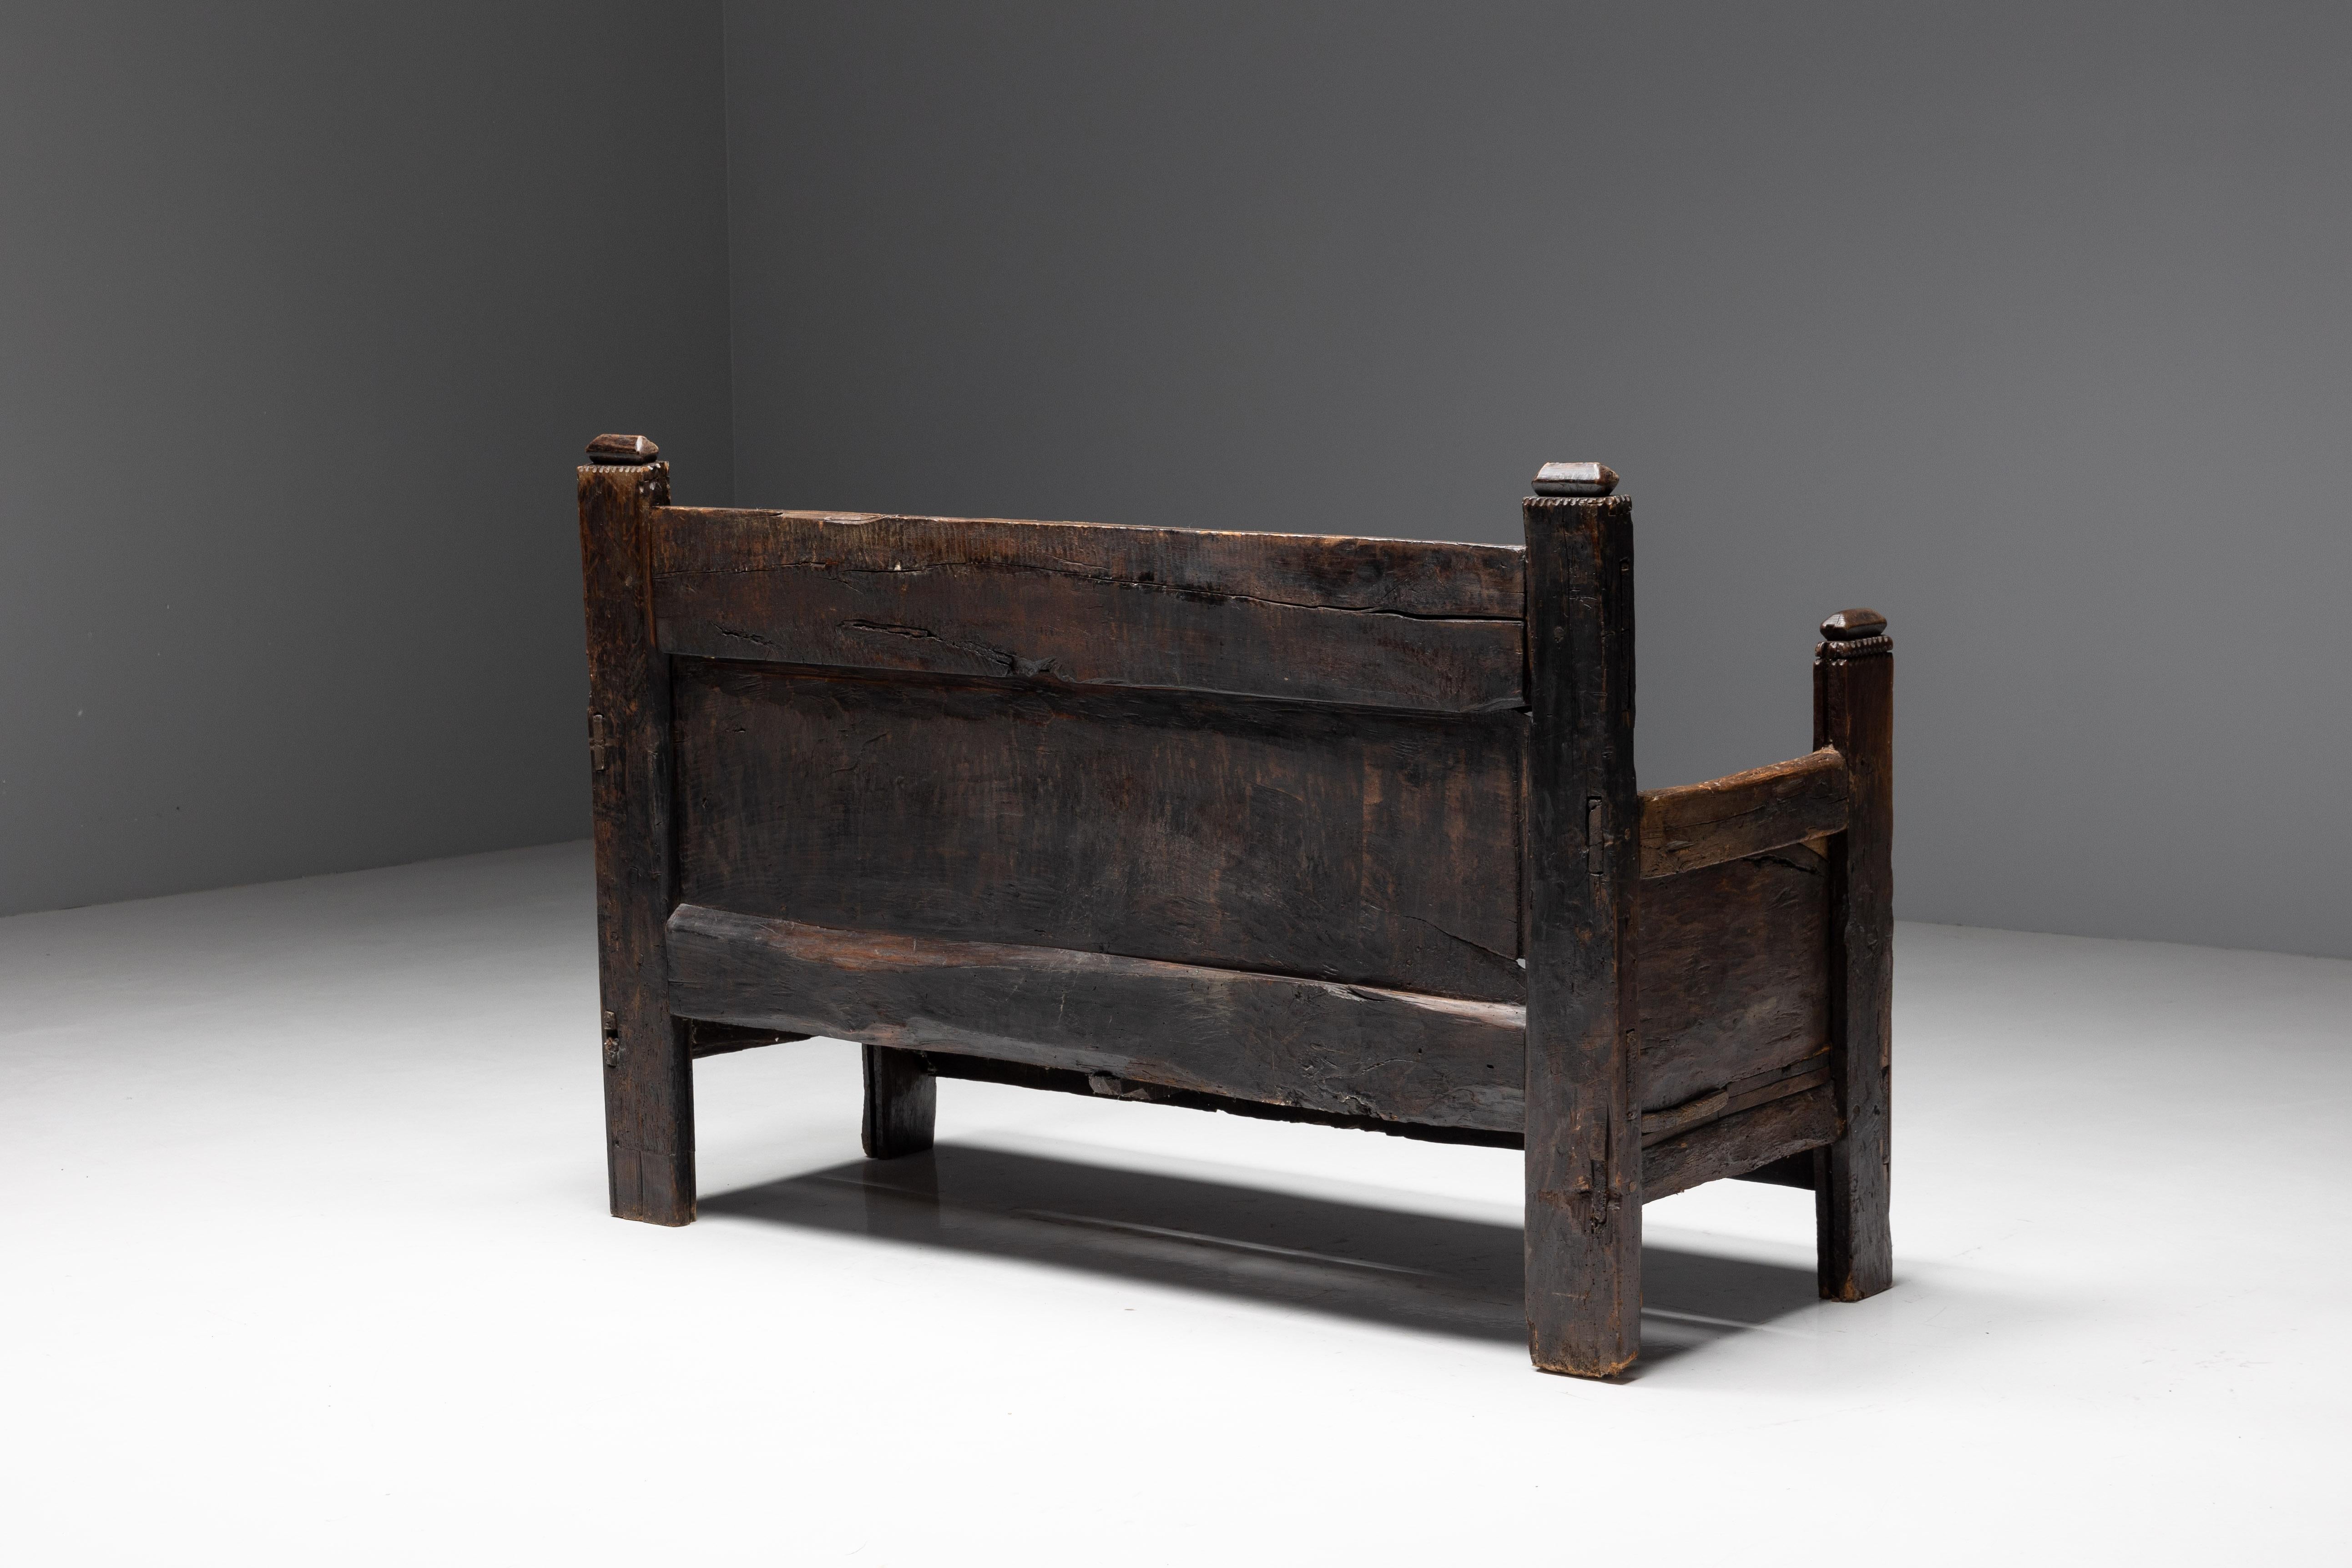 Rustic Art Populaire Bench, France, 19th Century For Sale 7